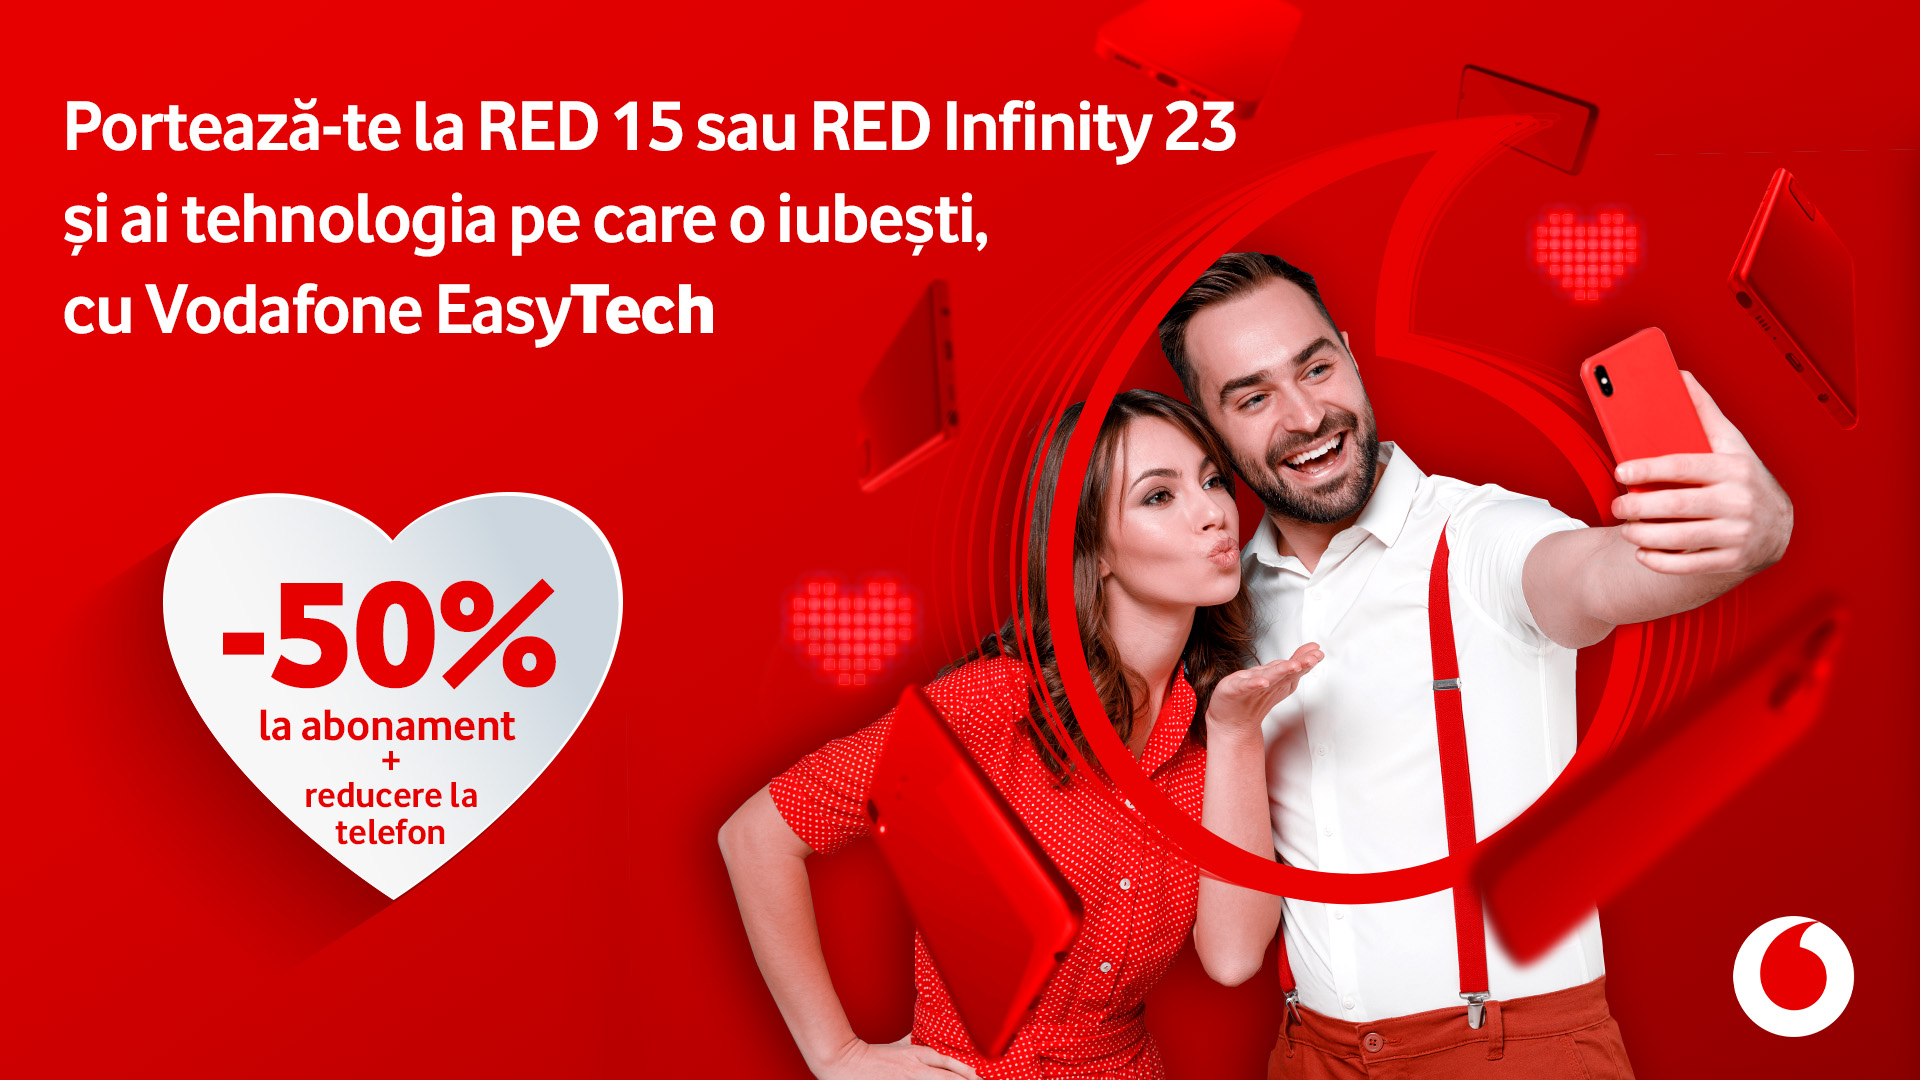 On Valentine’s Day, you can port to Vodafone and get a 50% discount on subscriptions & super prices on phones